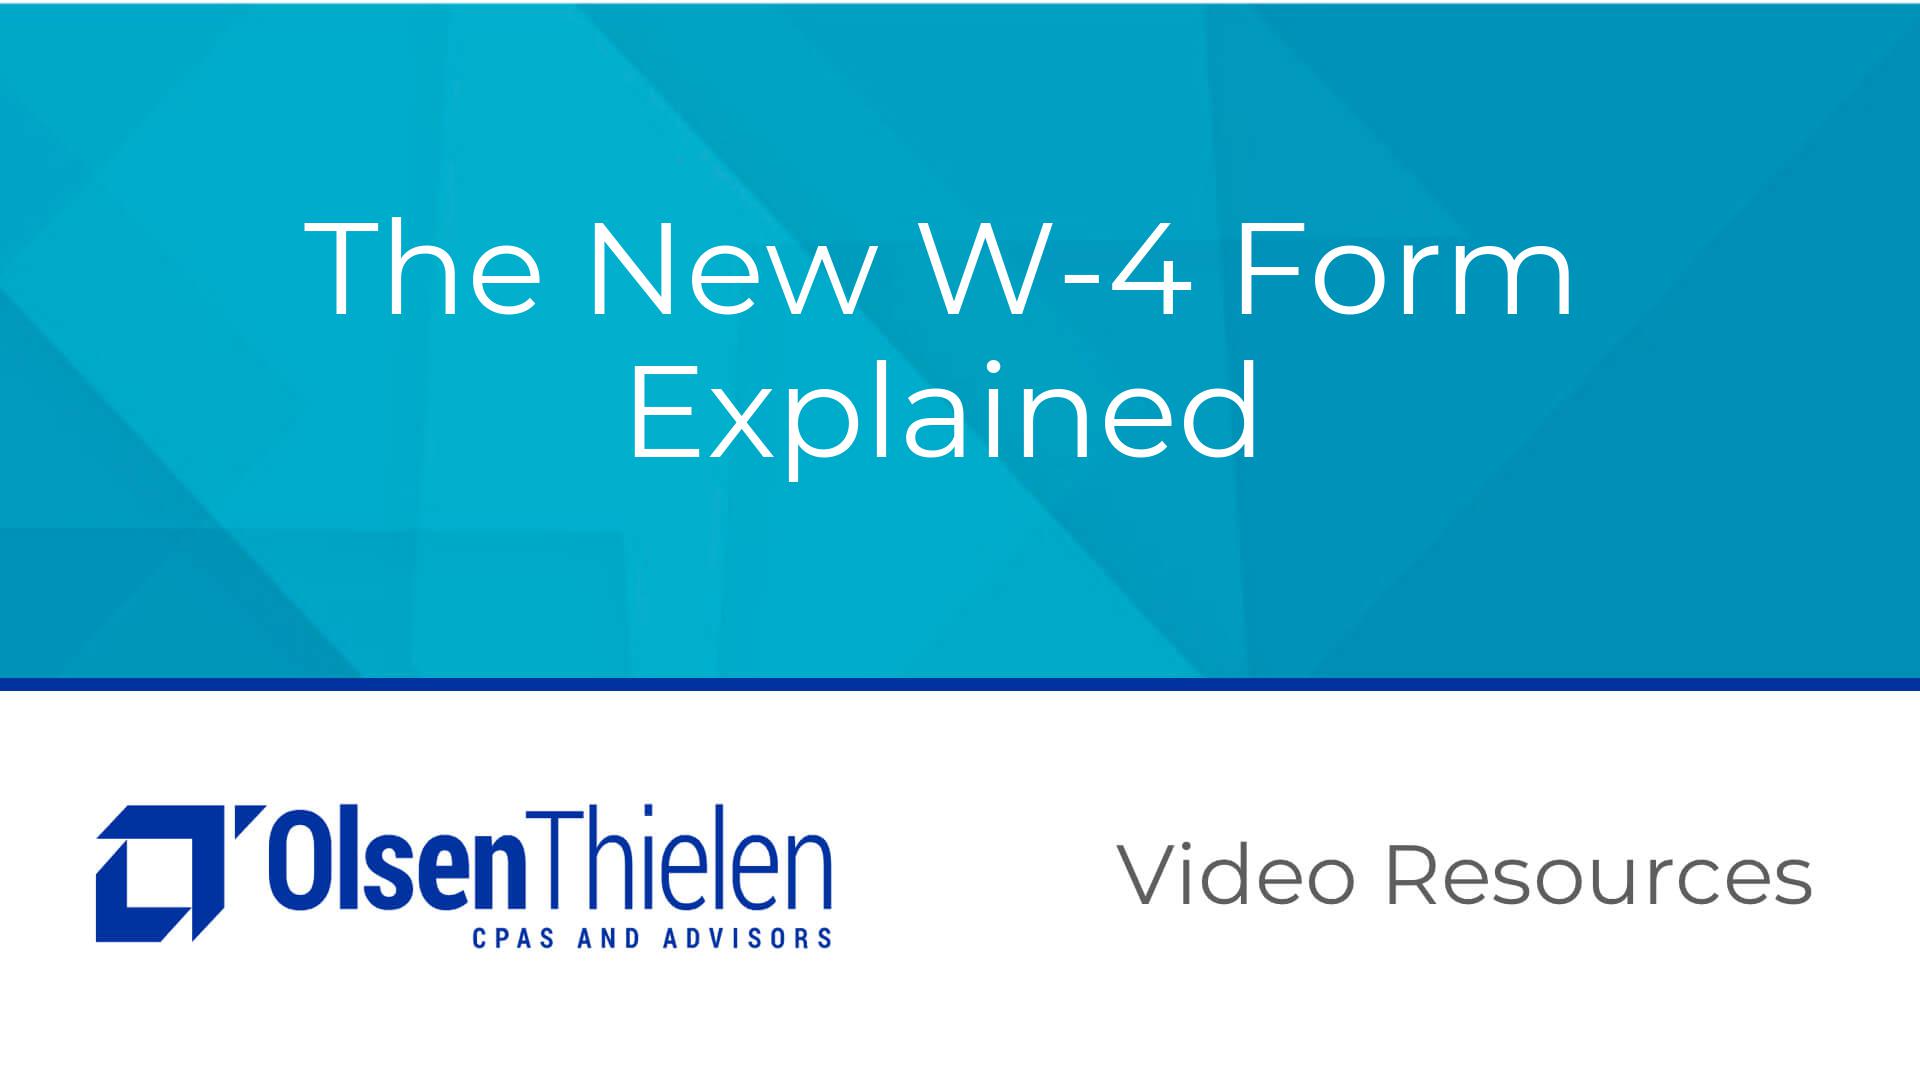 The New W-4 Form Explained